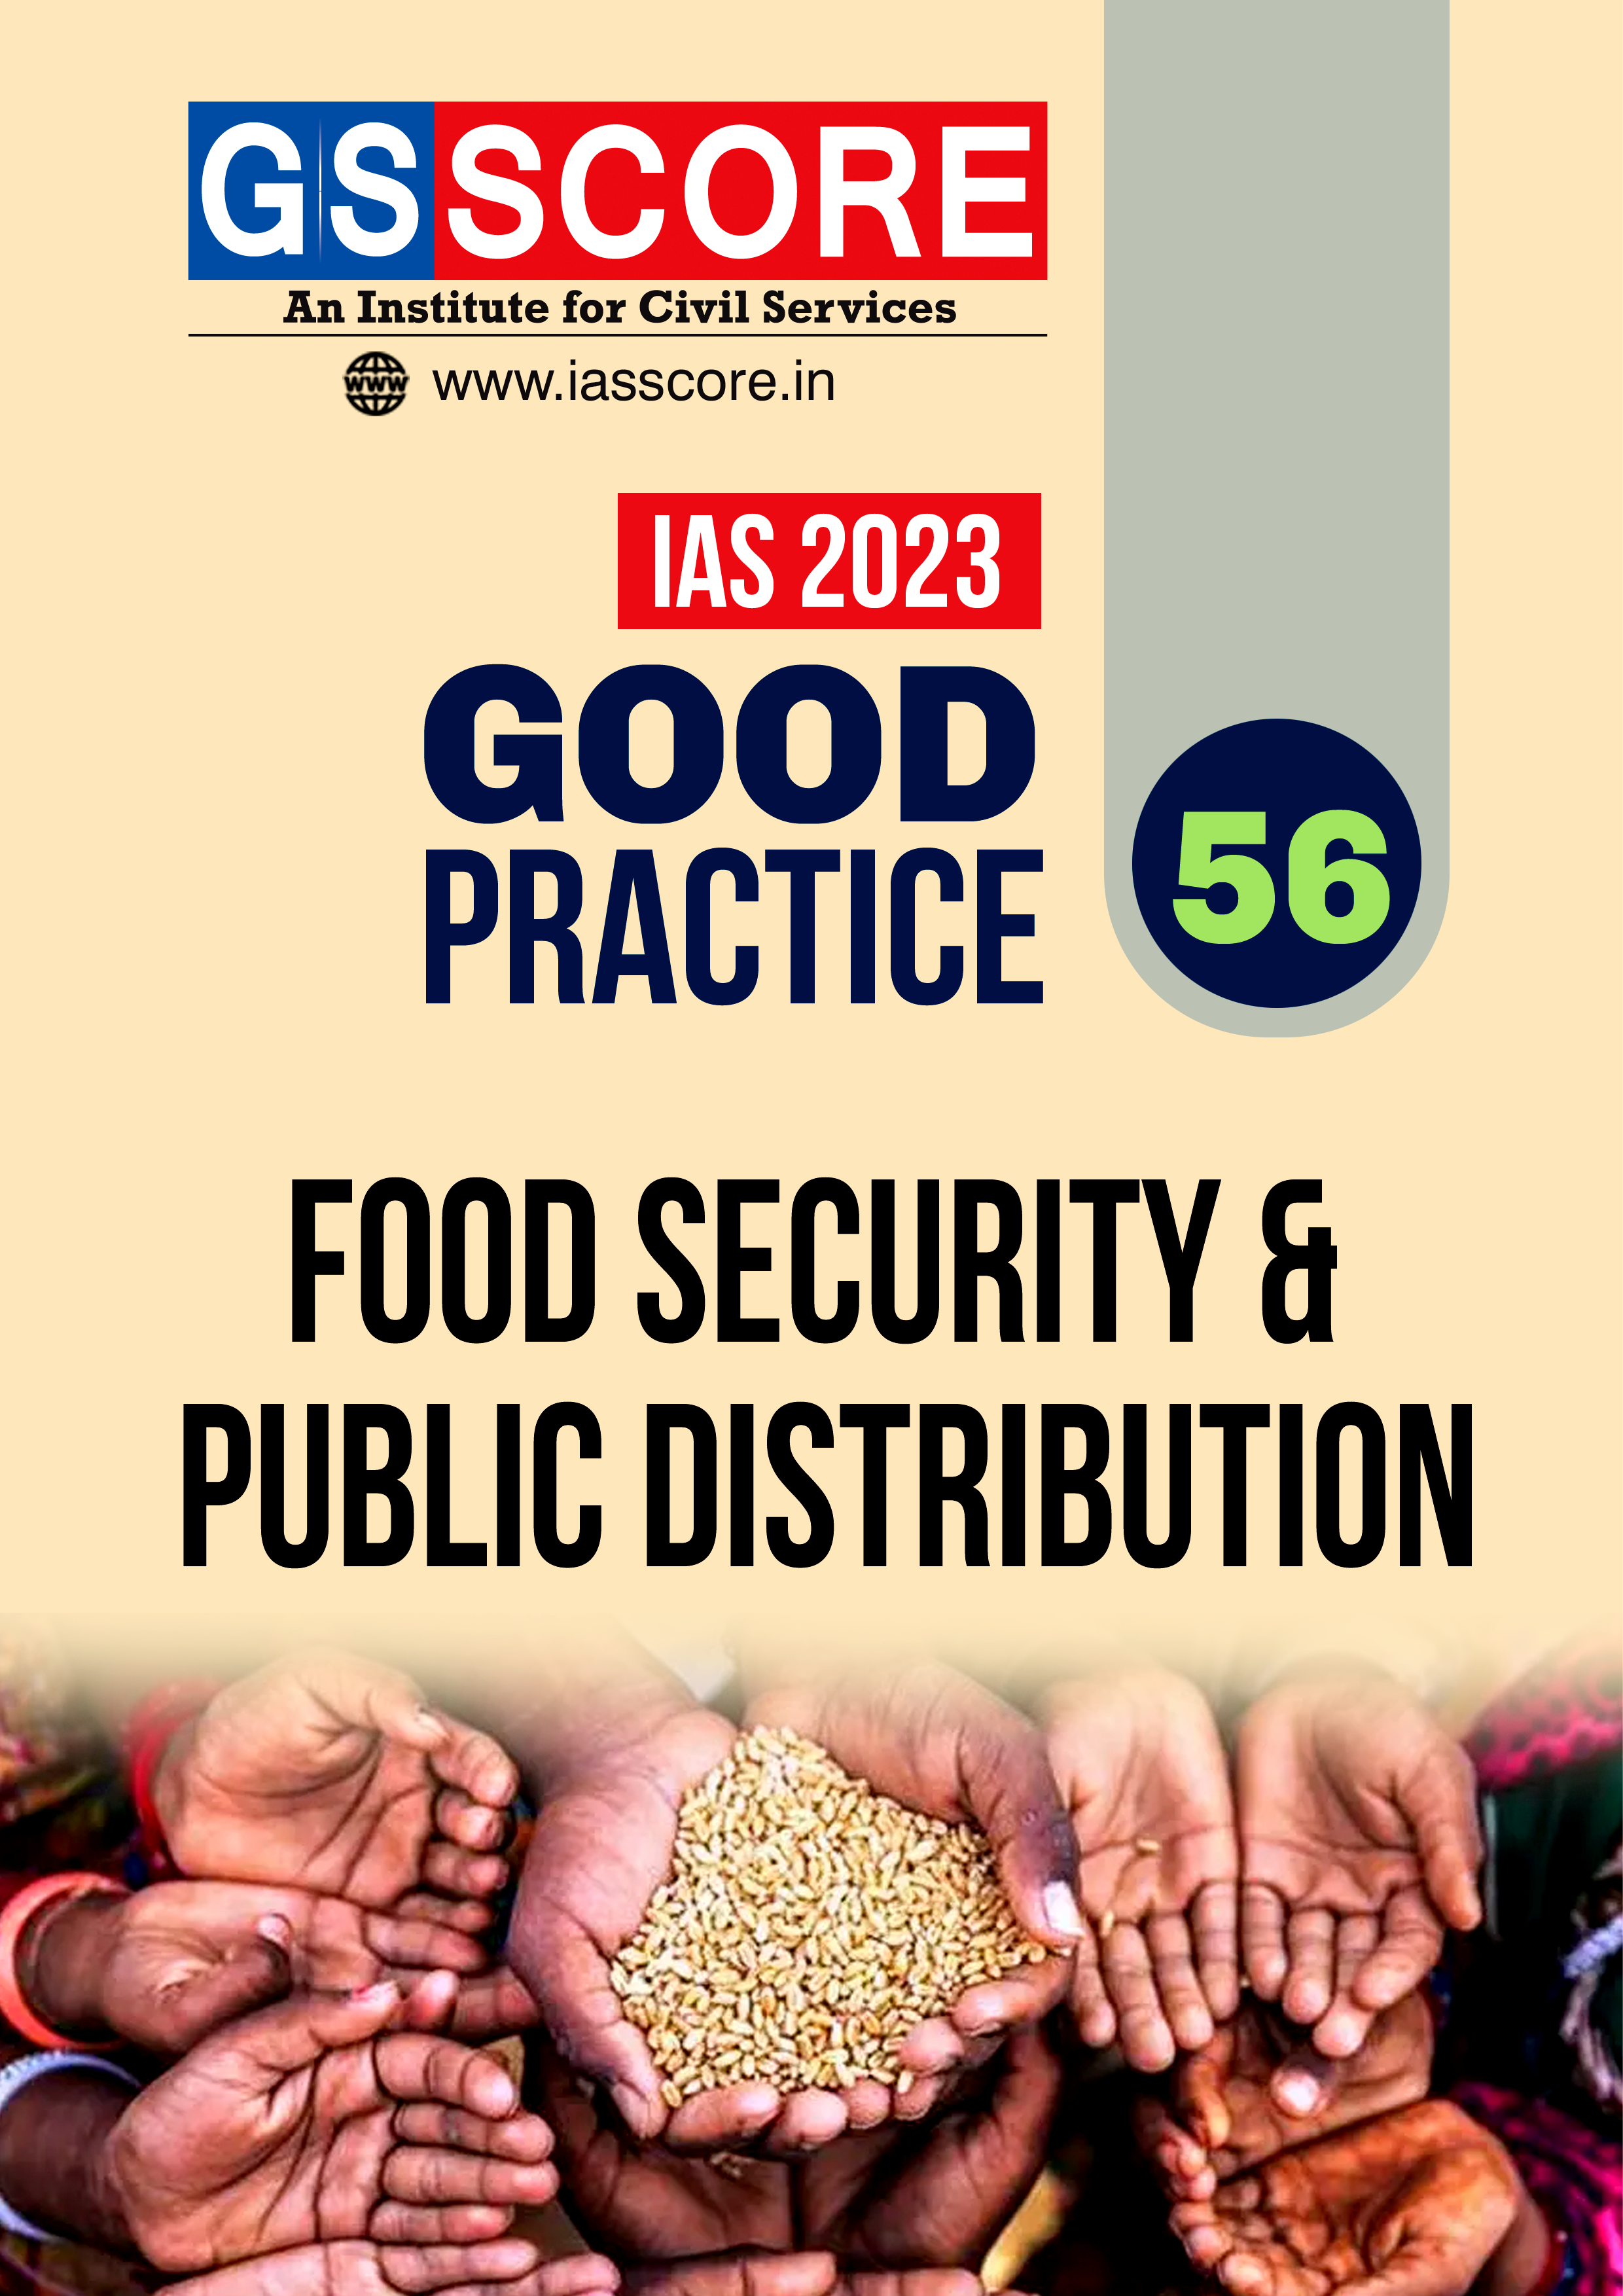 Good Practice - Food security and public distribution